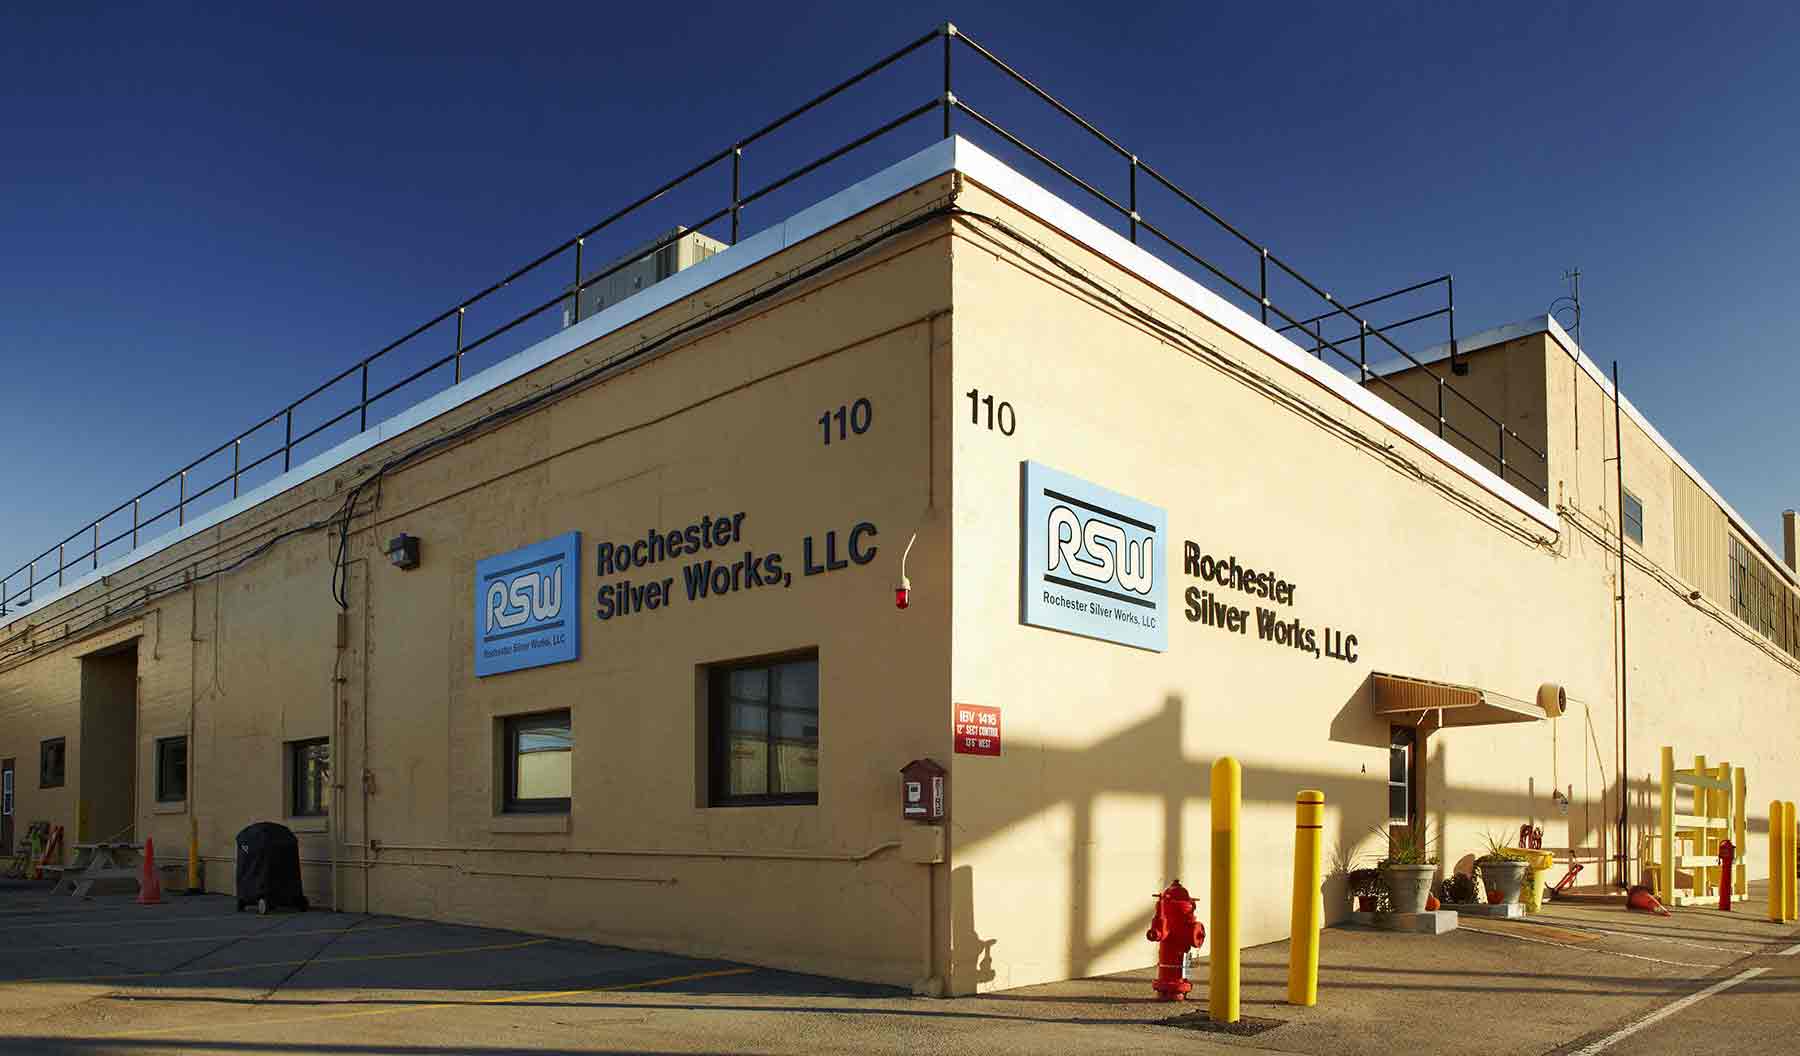 The RSW facility is housed on 10 acres in the Eastman Business Park (EBP), a 1,200-acre industrial complex in Rochester, New York.